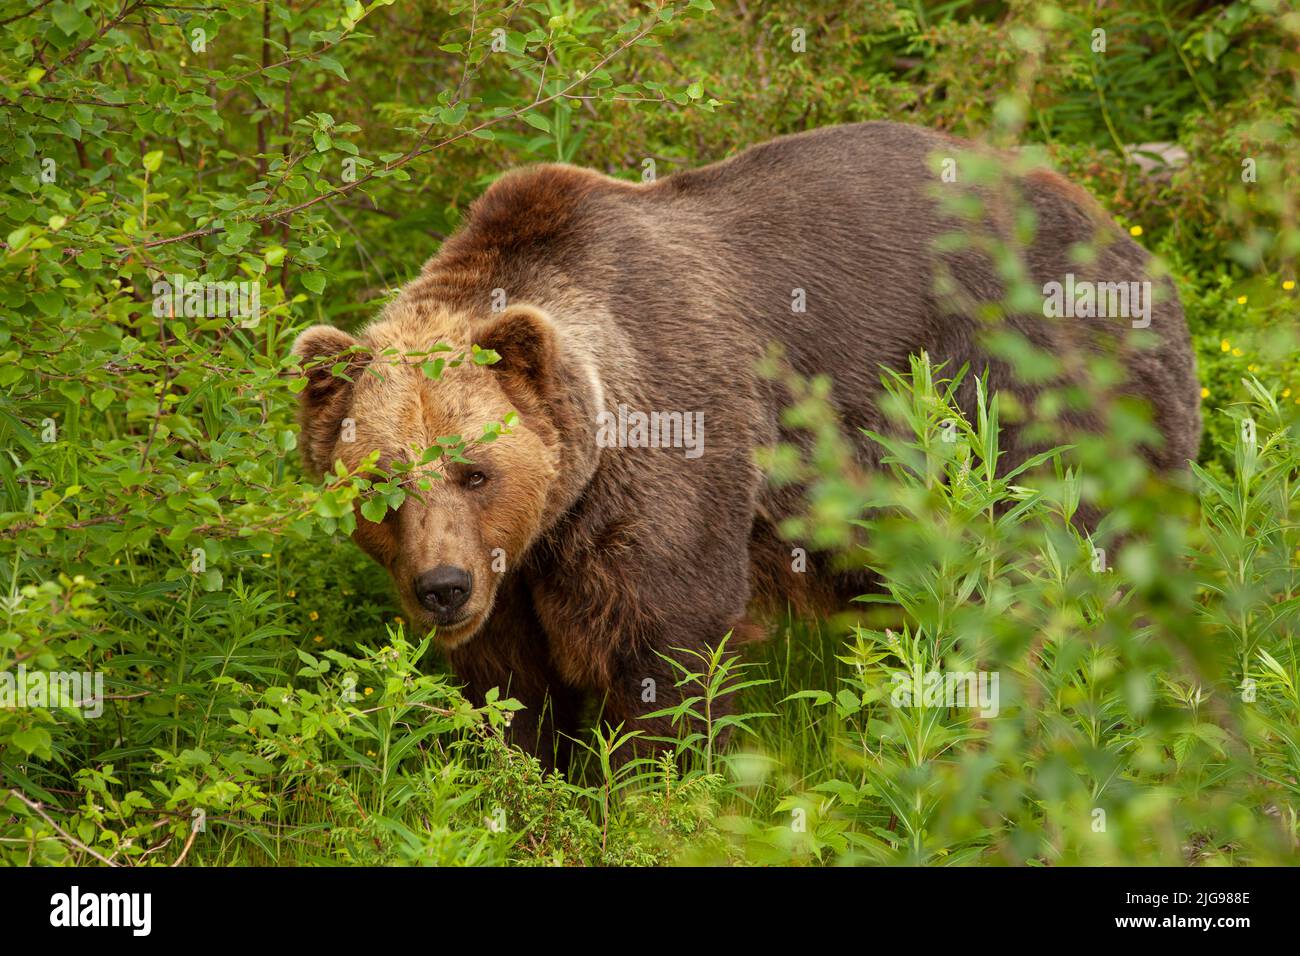 Brown bear hidden in bush with straight look. One eye hidden behind a twig. Large and dangerous animal in a forest. Stock Photo